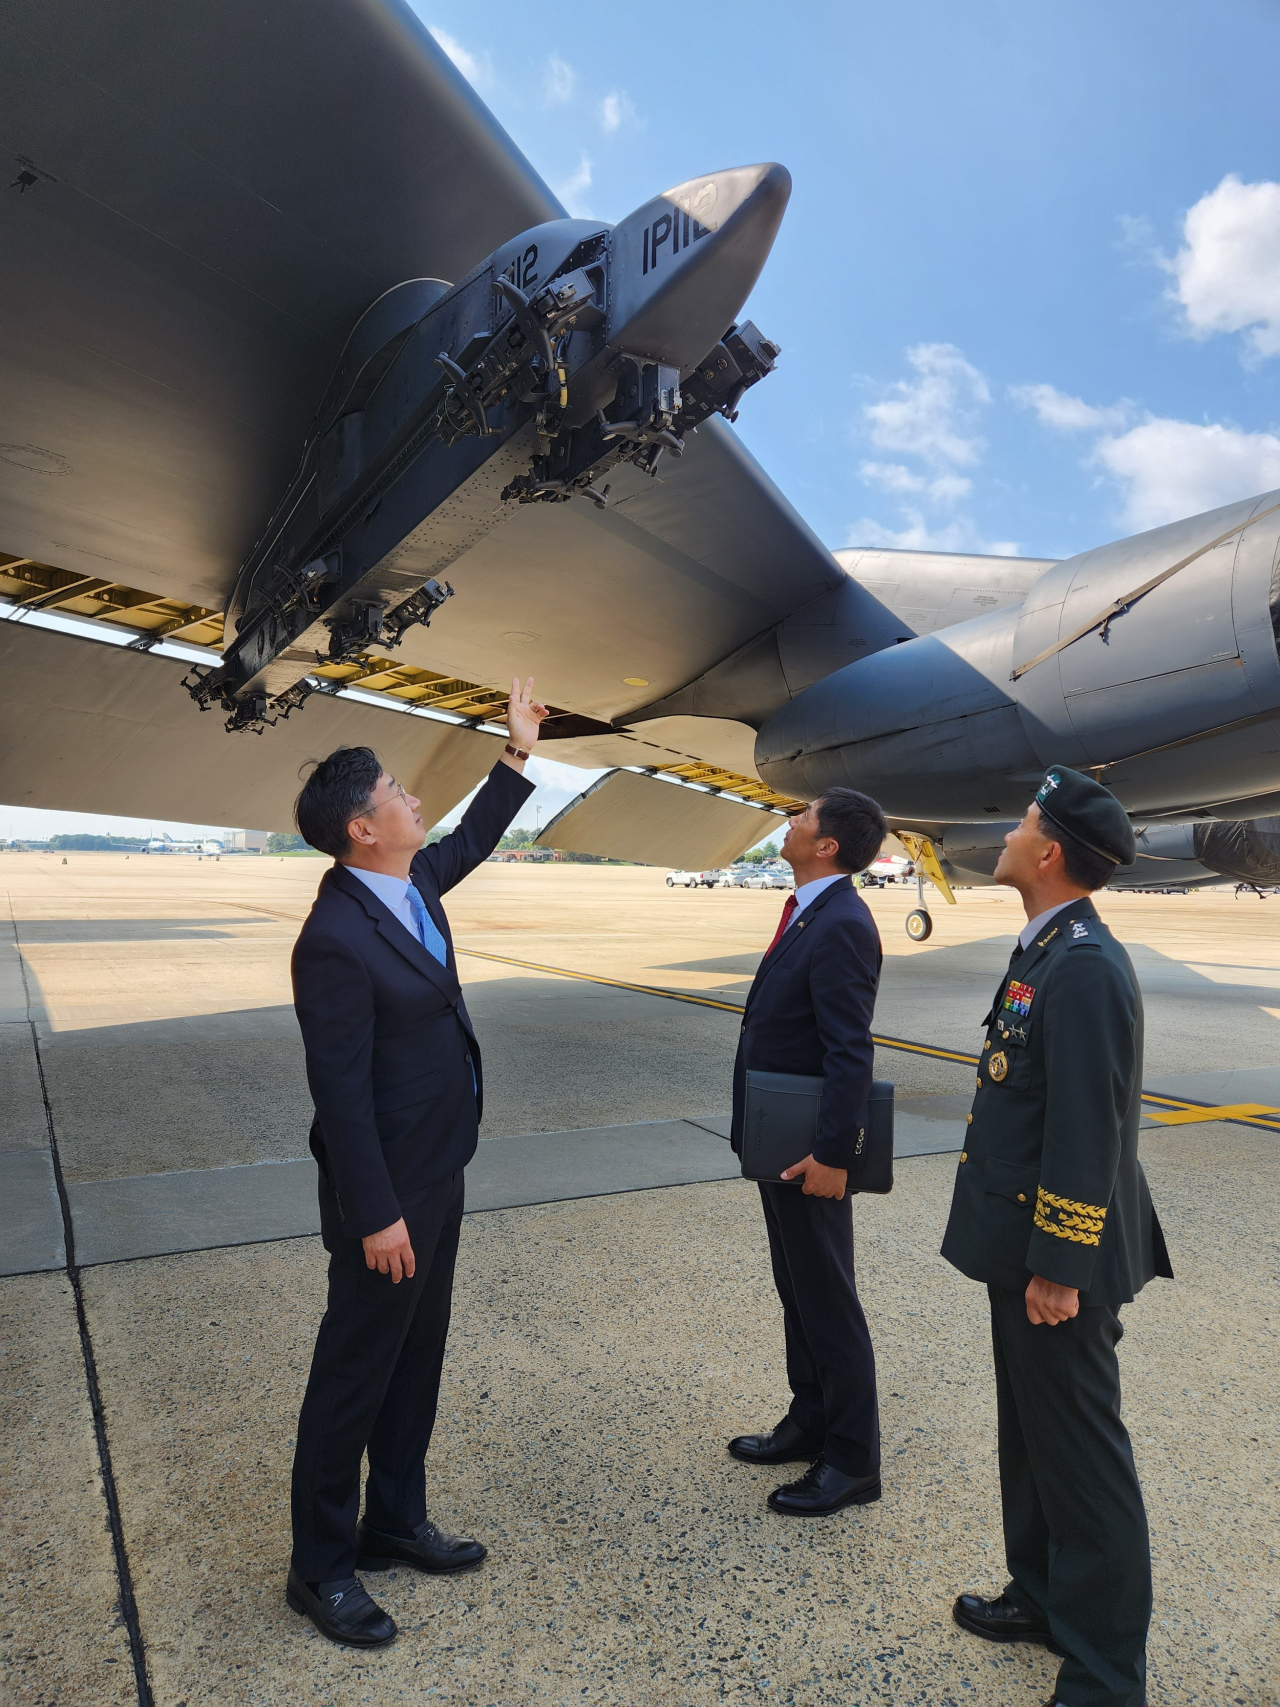 South Korean Vice Defense Minister Shin Beom-chul (L) looks at a B-52 strategic bomber at Joint Base Andrews outside Washington, D.C., on Friday, in this photo released by Seoul's defense ministry. (Defense Ministry)